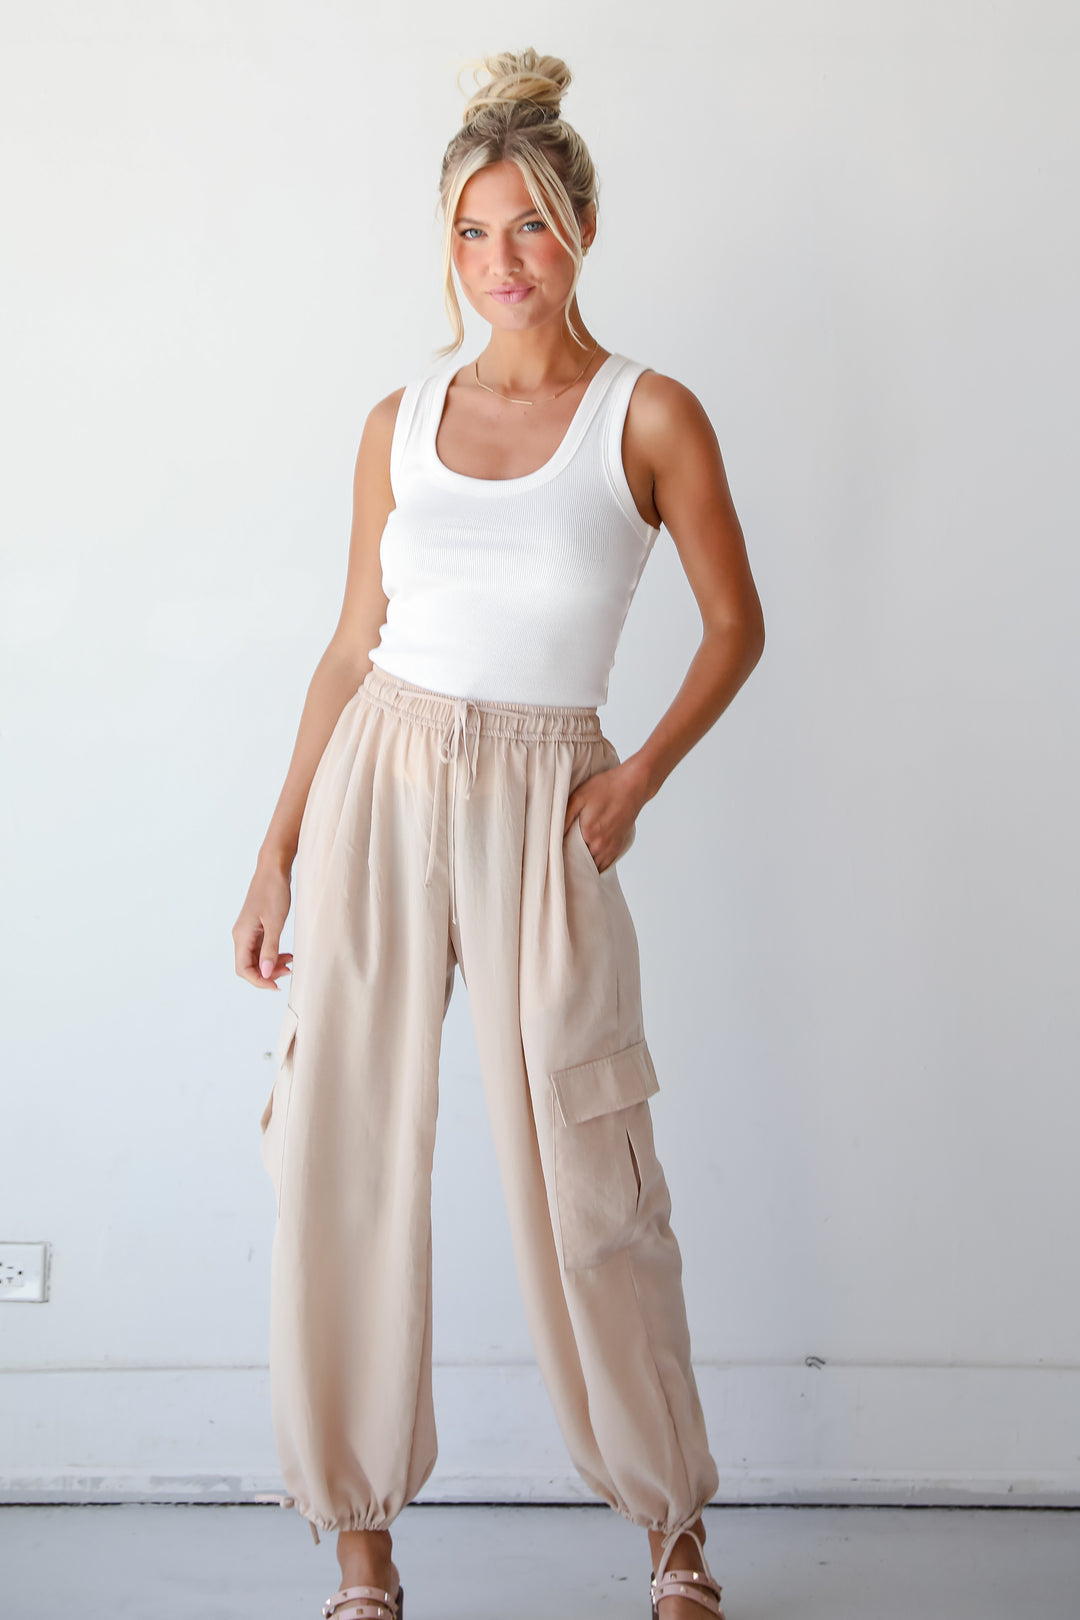 high rise Taupe Cargo Pants